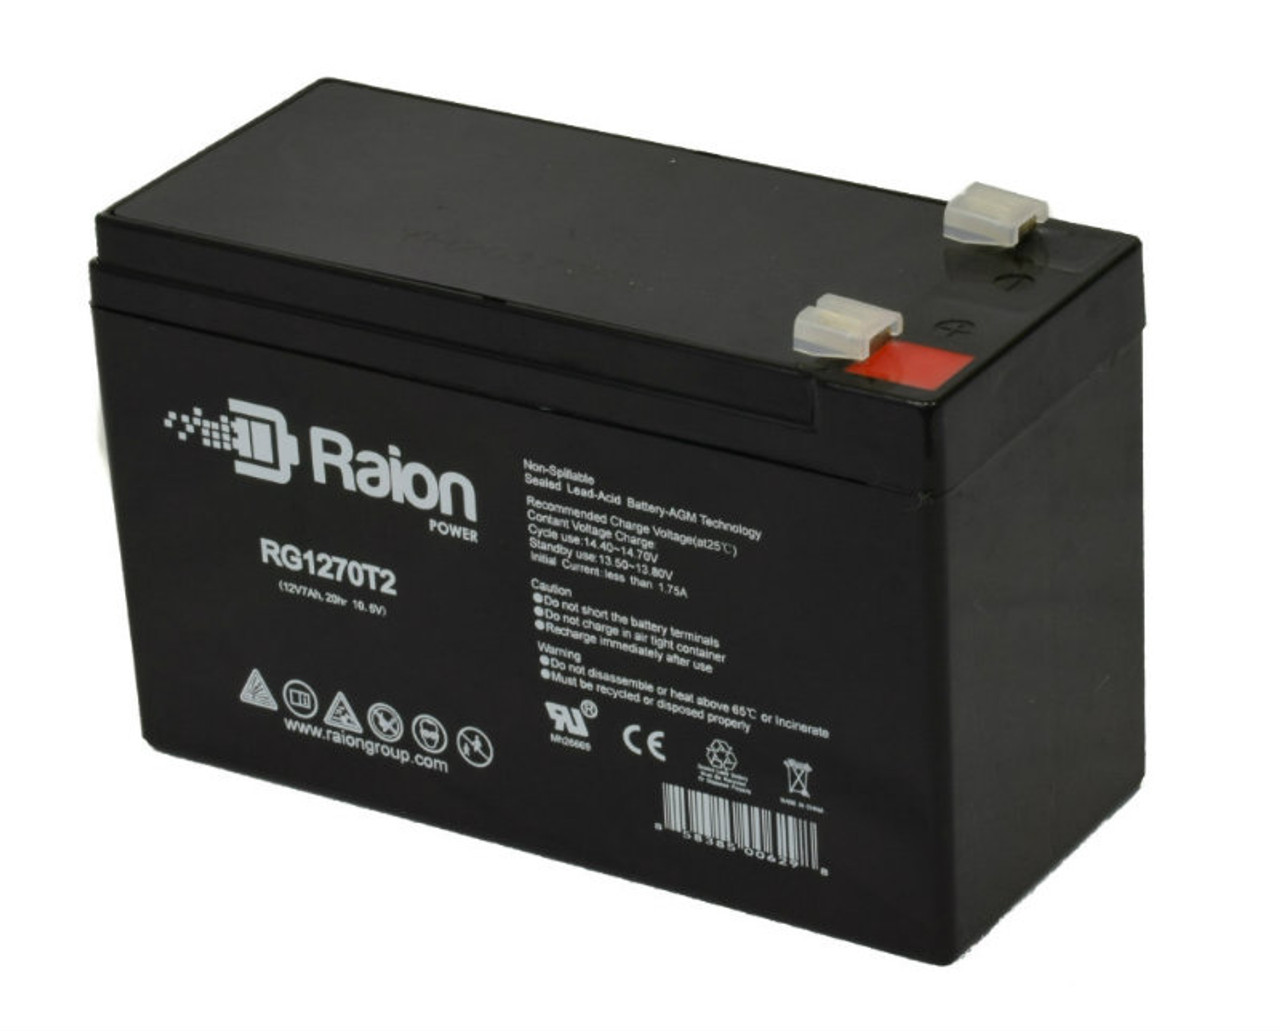 Raion Power RG1270T2 12V 7Ah Rechargeable Battery for F&H UN7-12